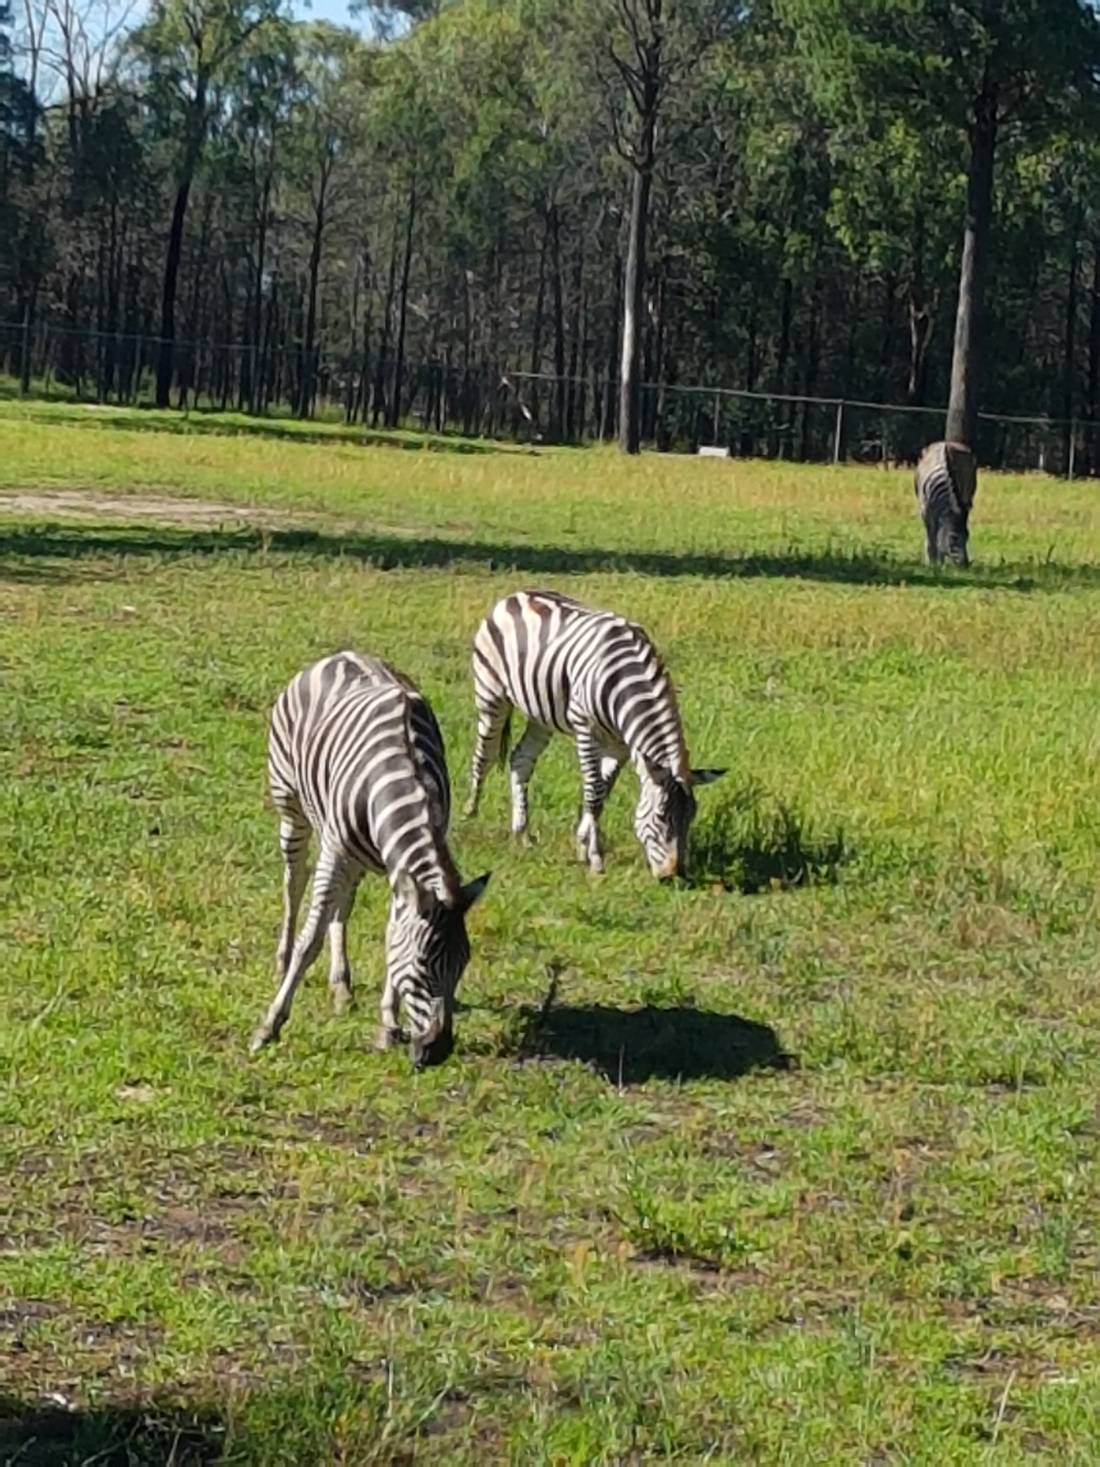 Zebras. They’re pretty fascinating to see in person with those wild stripes.